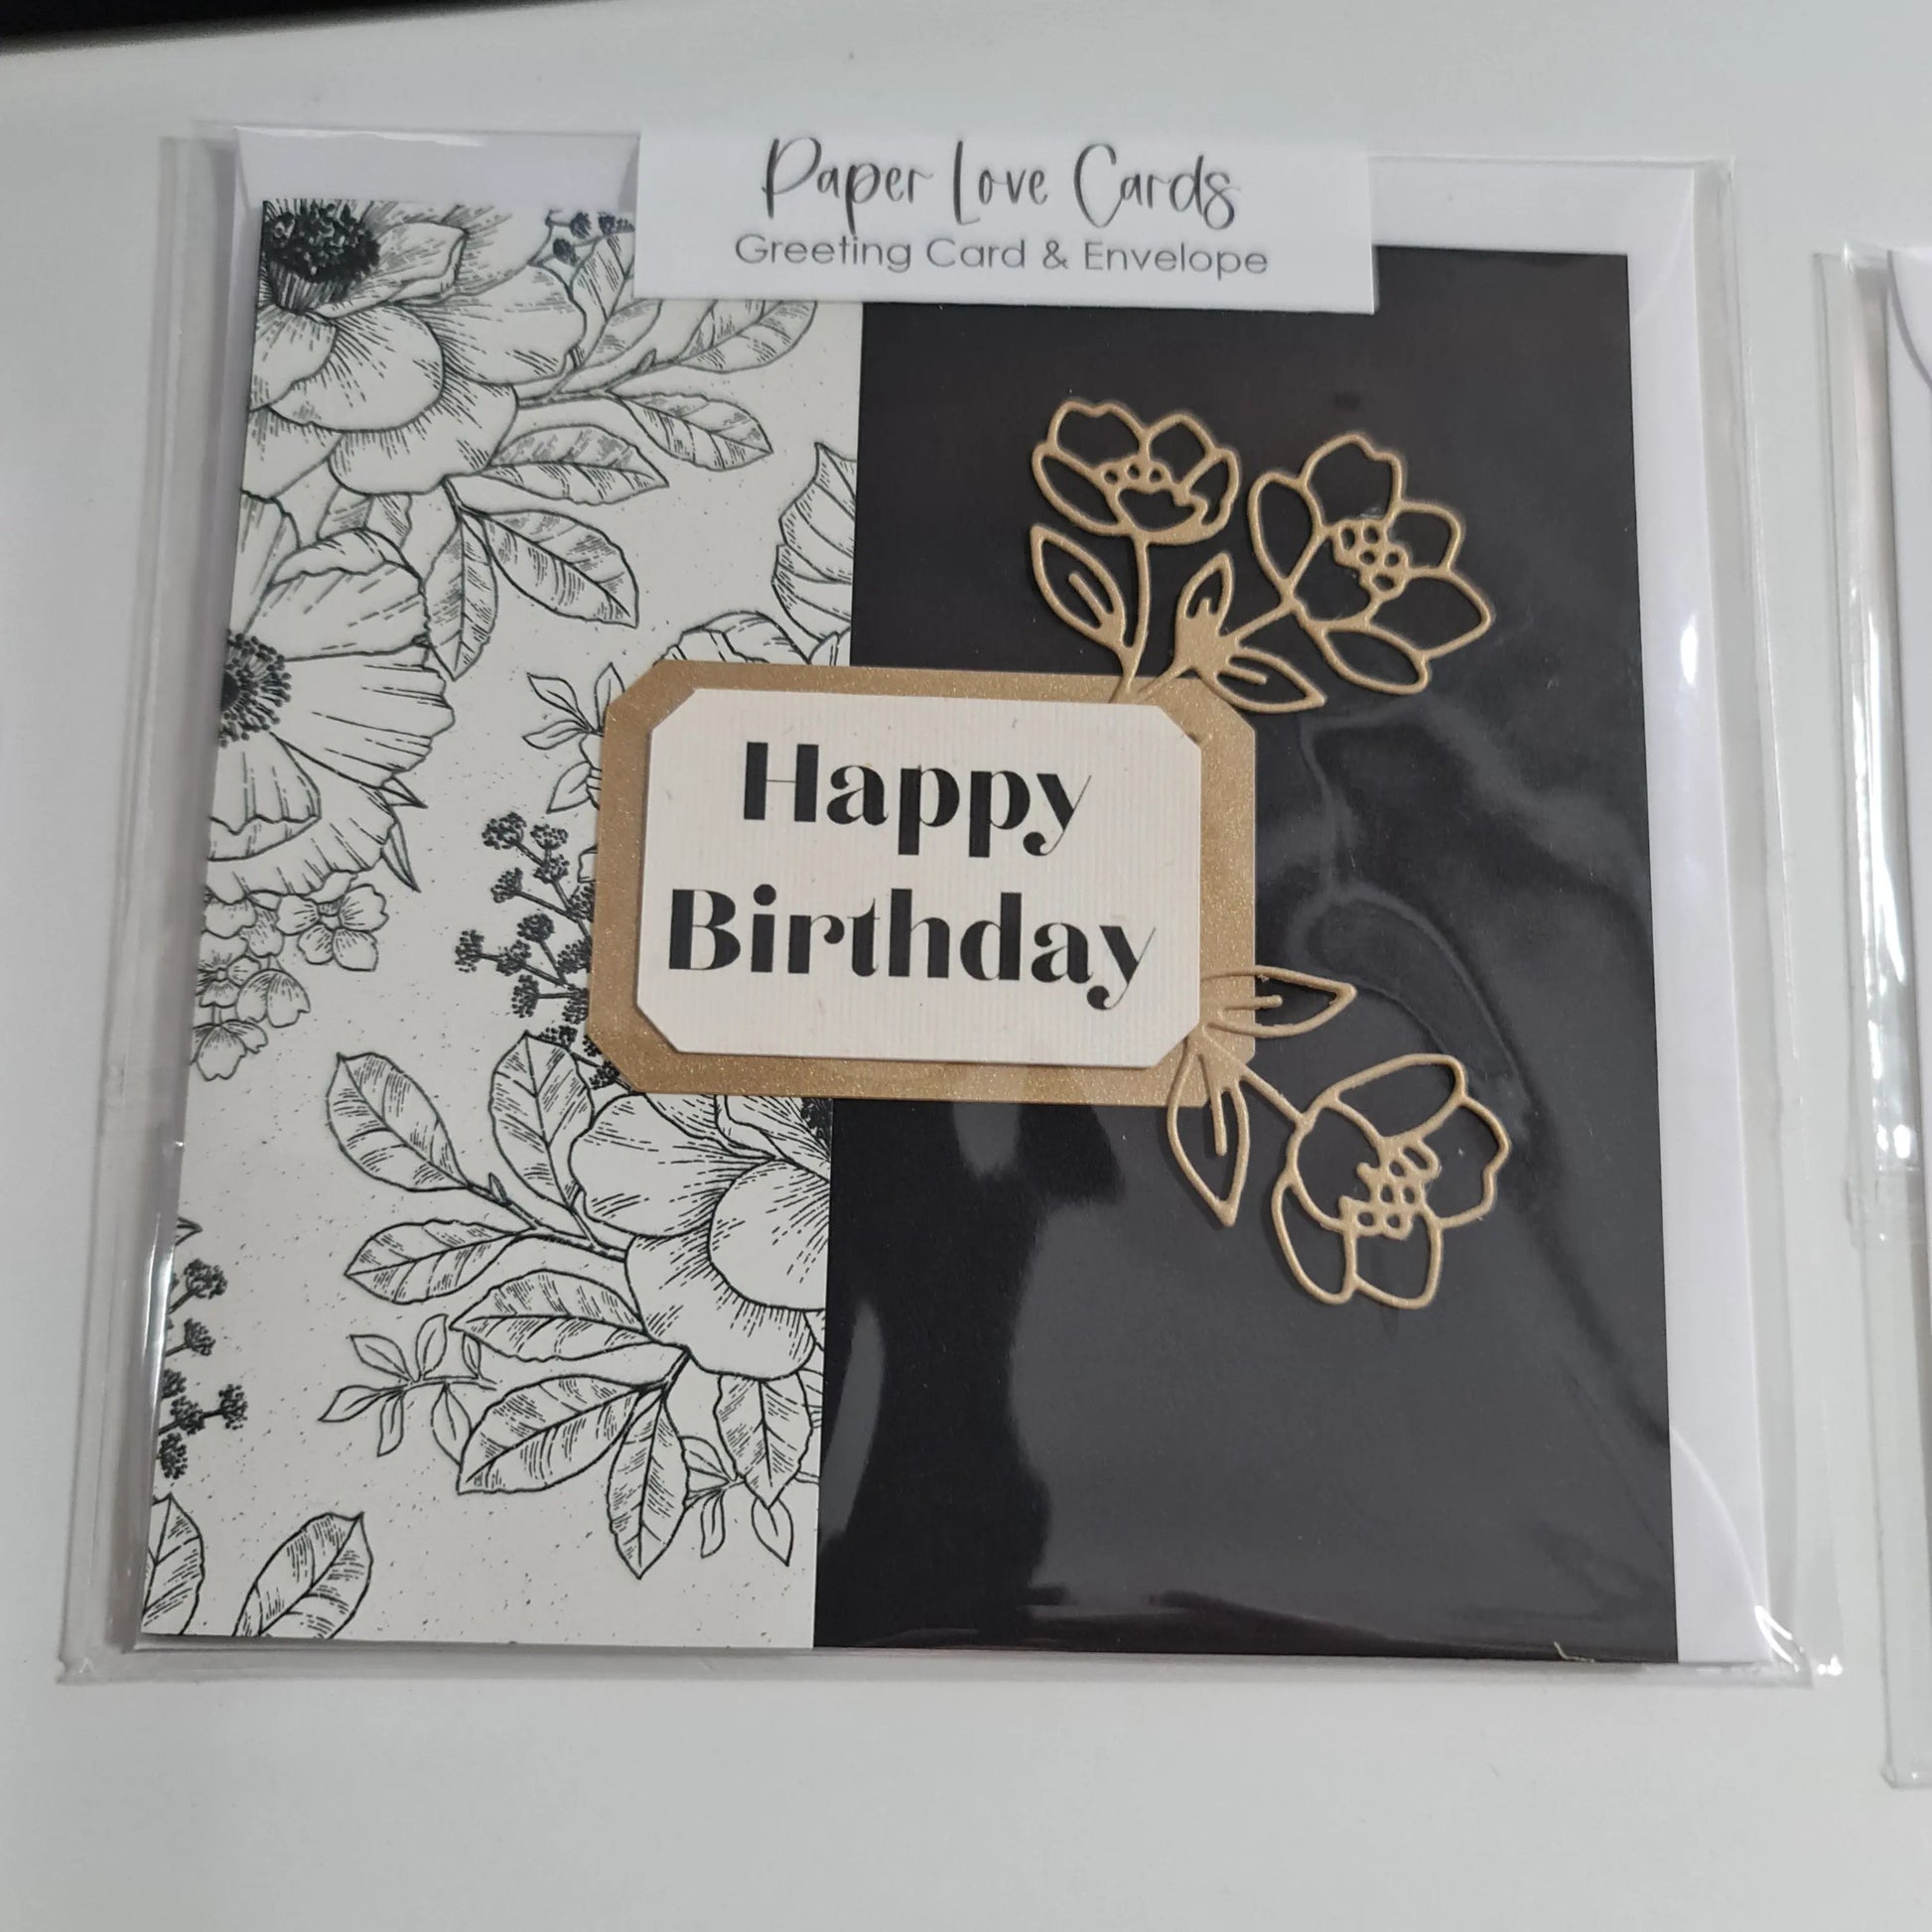 Black White and Floral with Gold accent - Happy Birthday Card Paper Love Cards